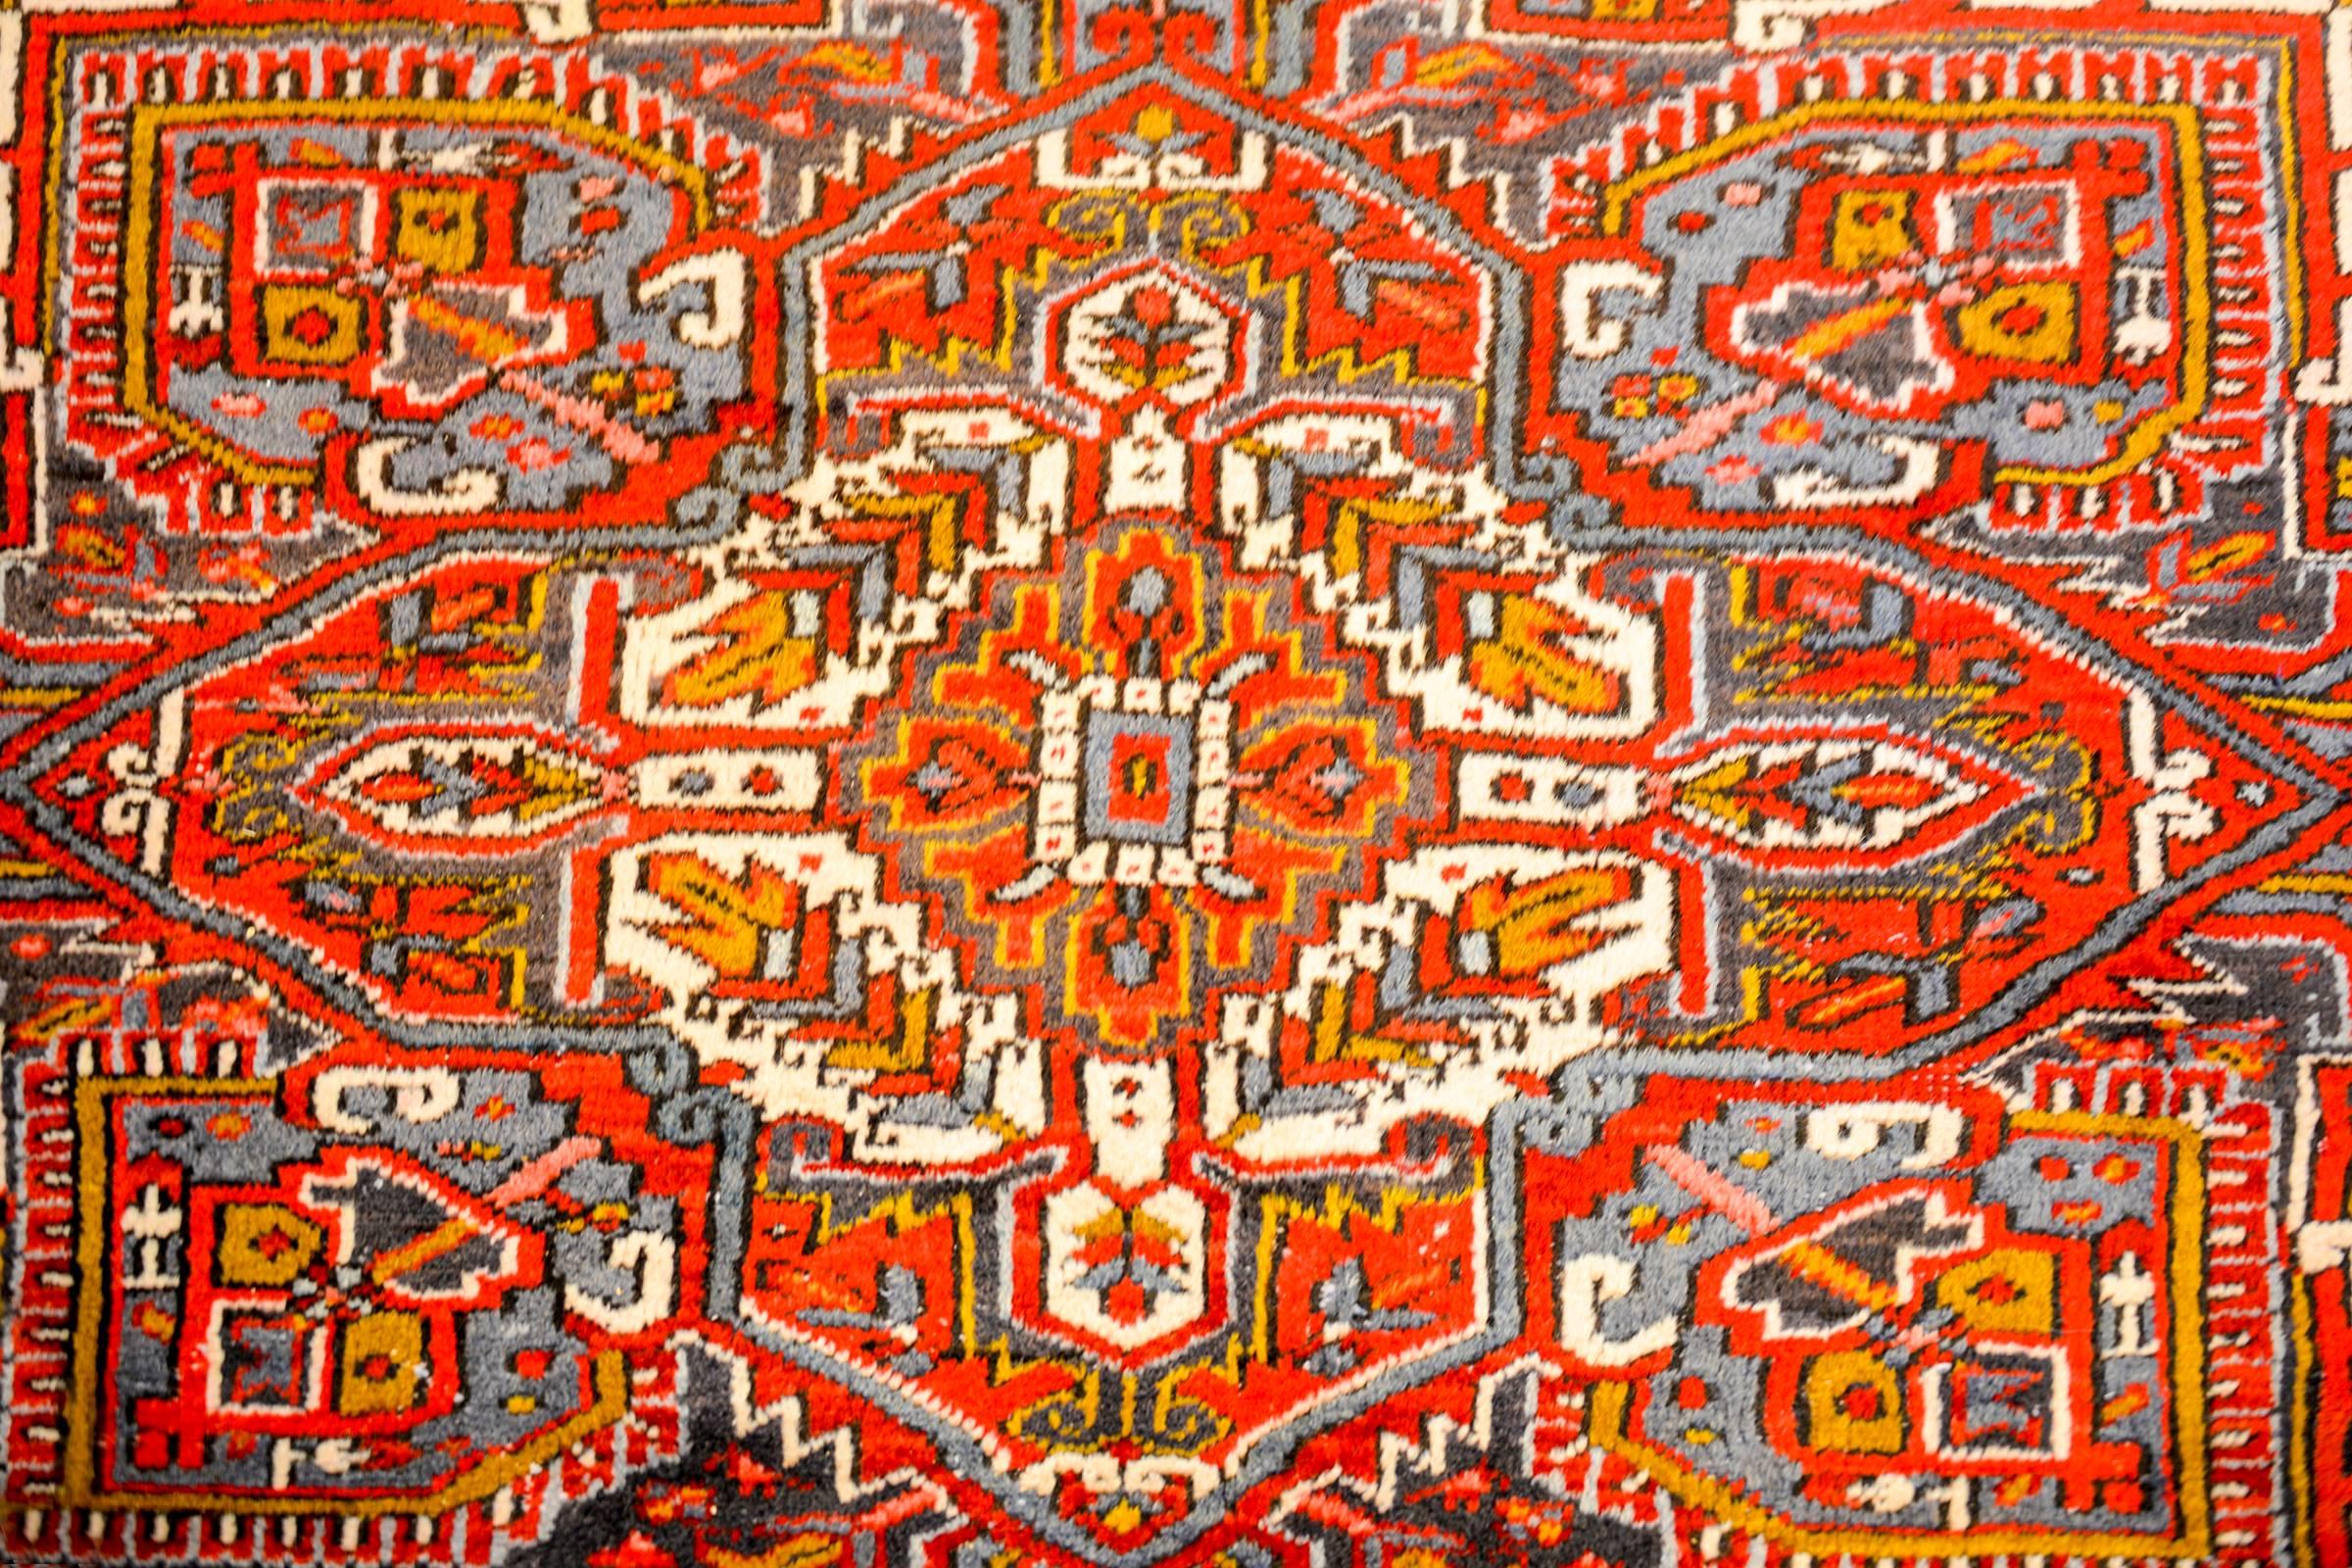 An amazing mid-20th century Persian Heriz rug with a large central multi-lobed floral medallion on a rich crimson background. The field is intensely woven with a complementary floral pattern. The border is comprised of a wide stylized floral pattern